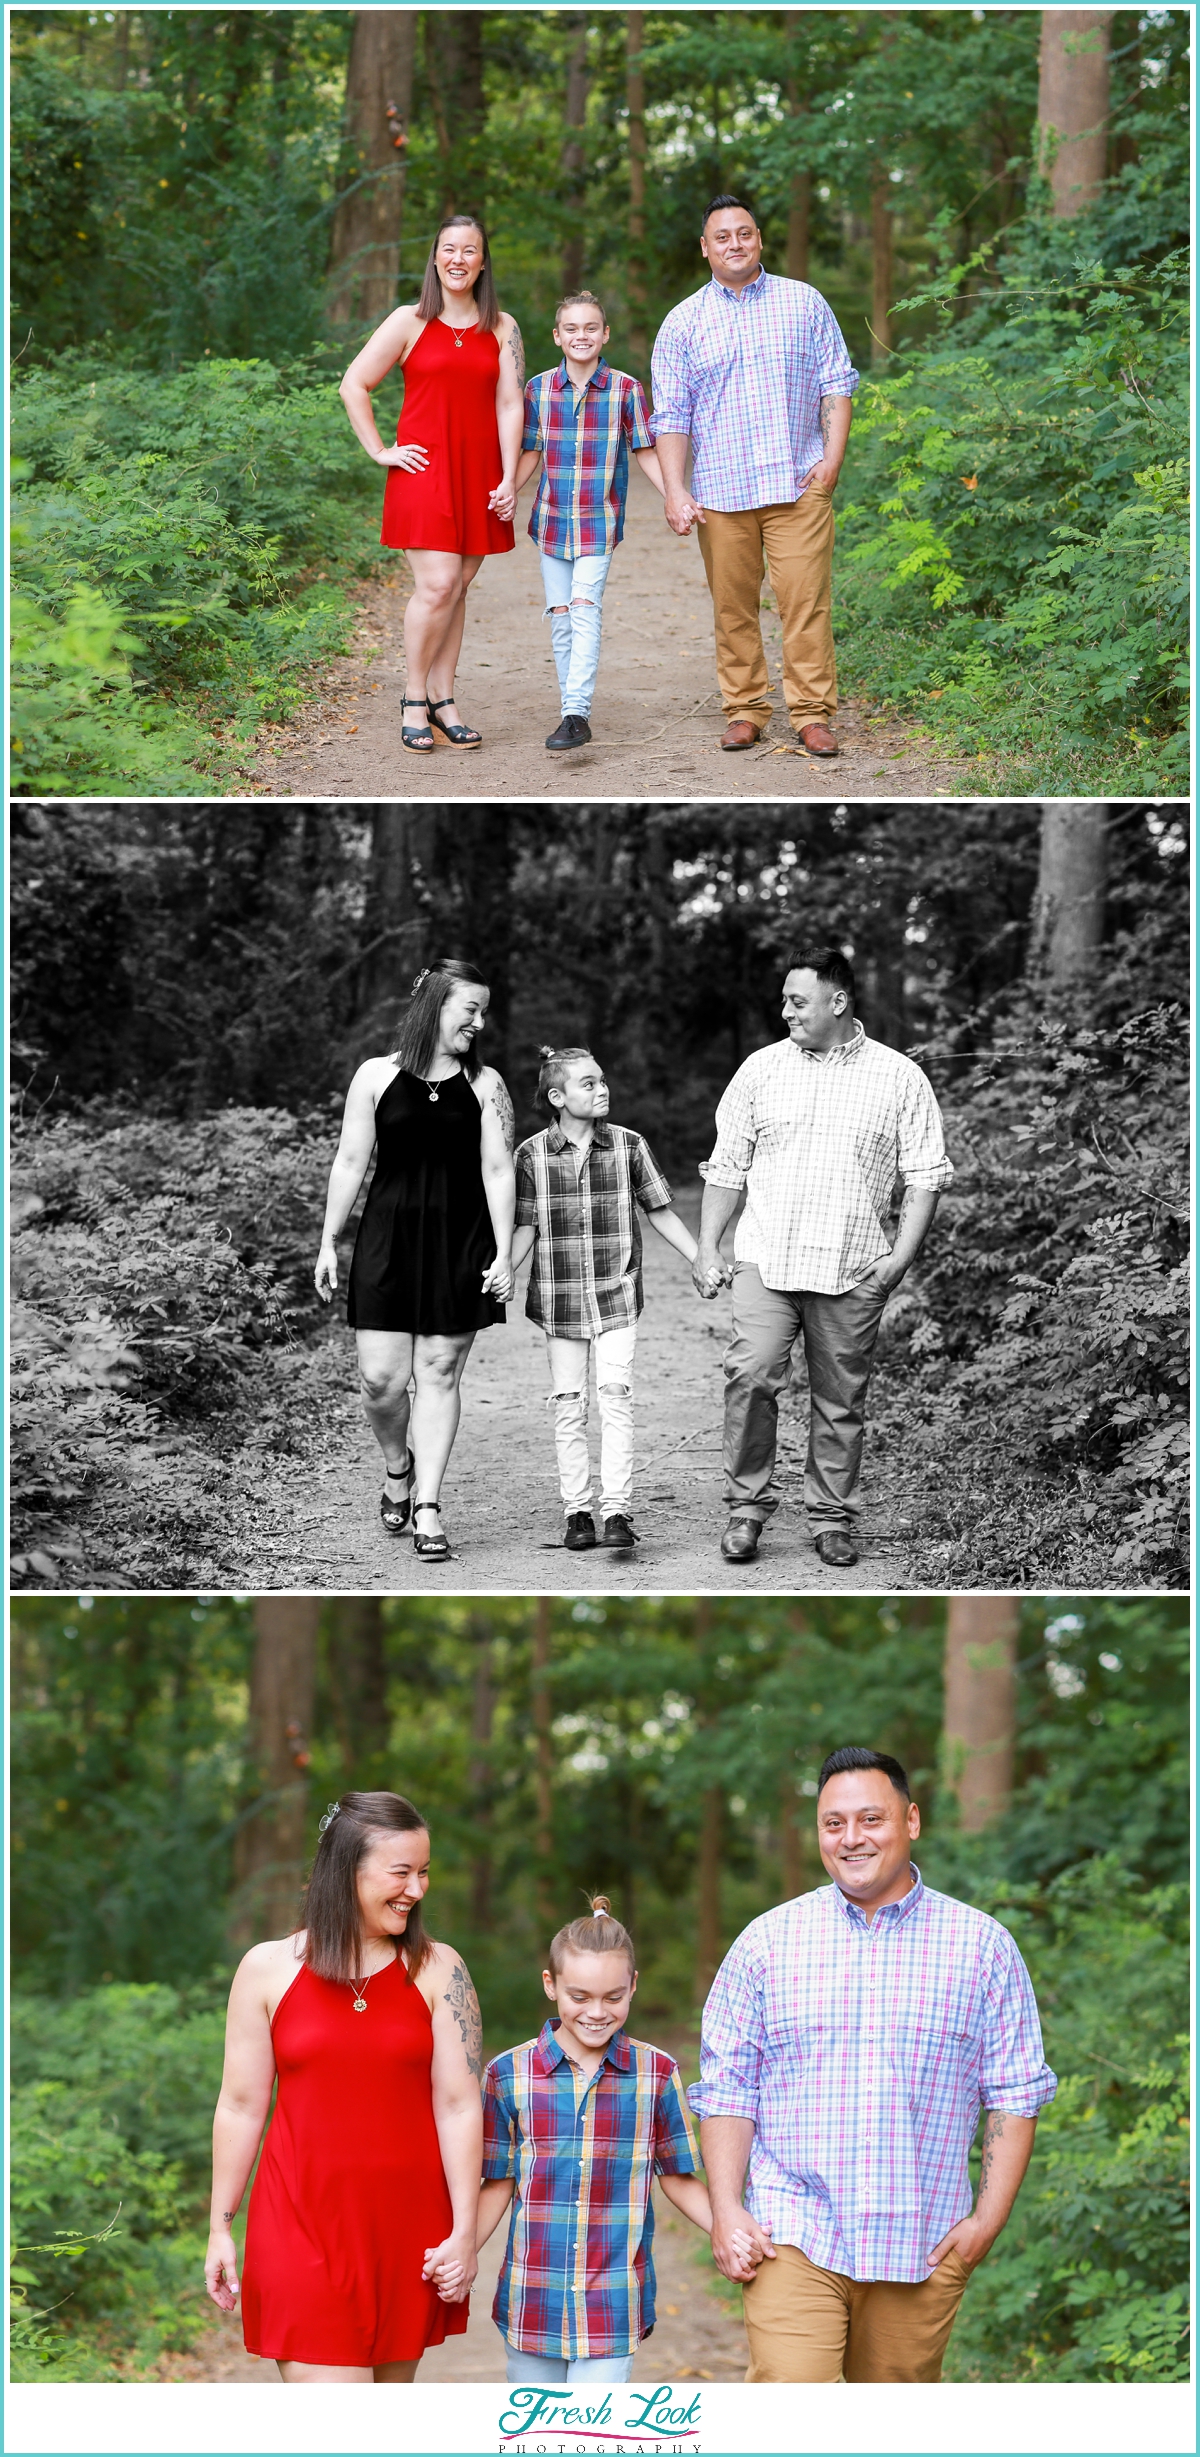 Fun Family Photos in the Woods